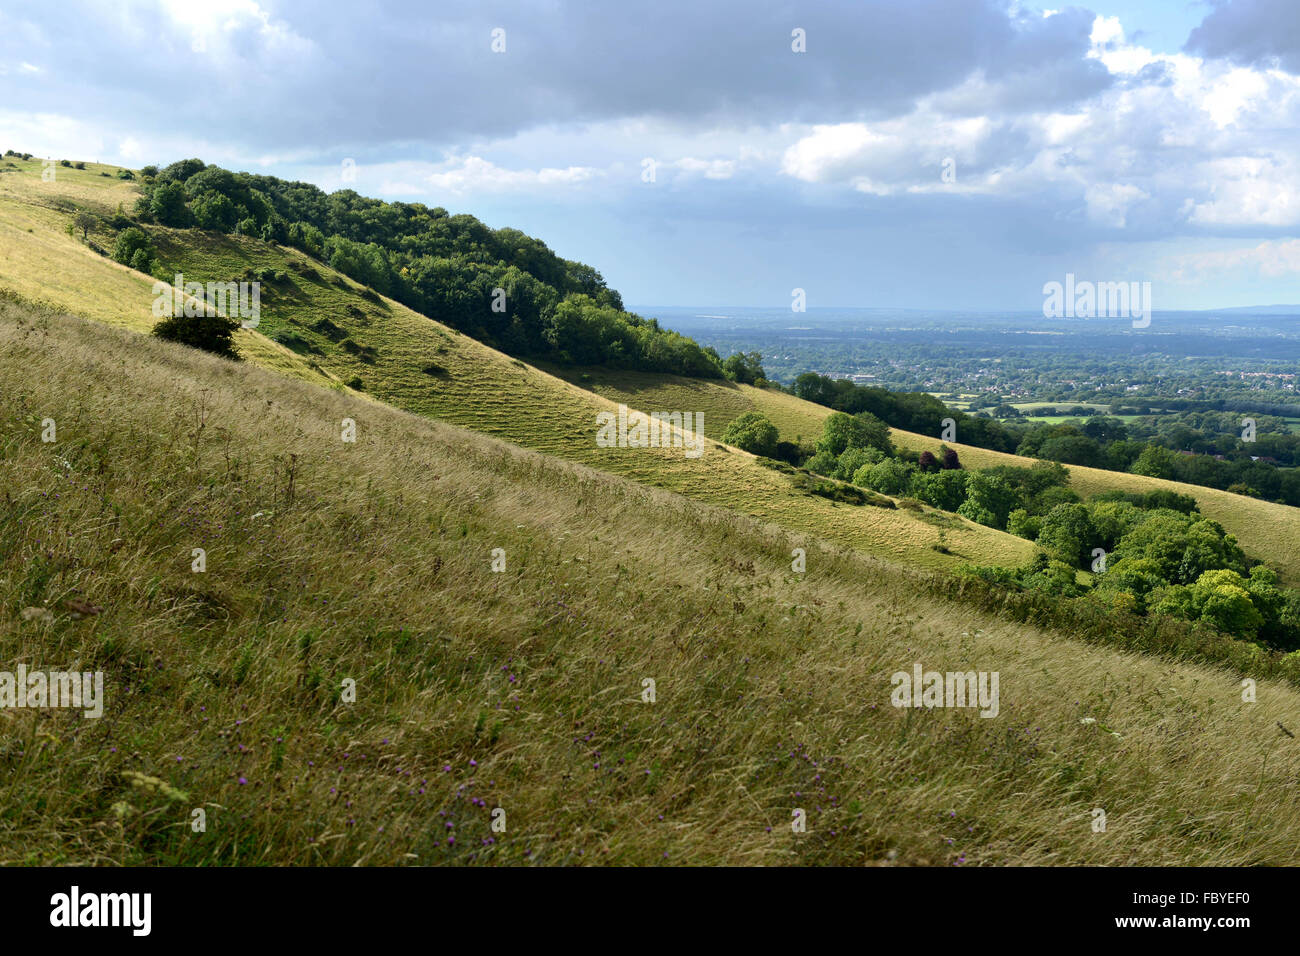 Ditchling Beacon, South Downs National Park, UK Stockfoto